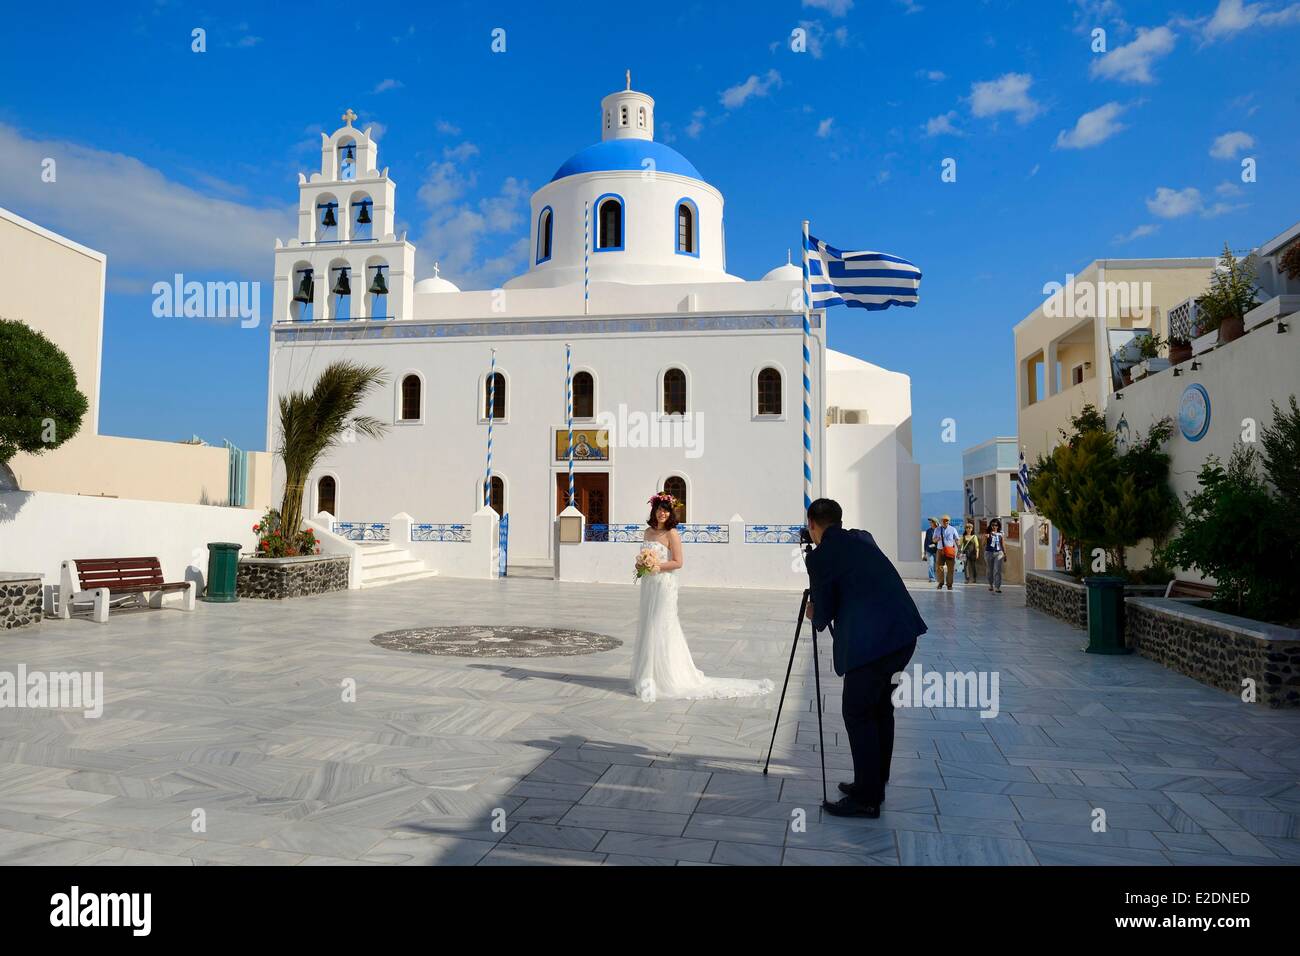 Greece Cyclades Aegean Sea Santorini (Thira or Thera) village of Oia wedding picture in front of Panagia church many Asian Stock Photo